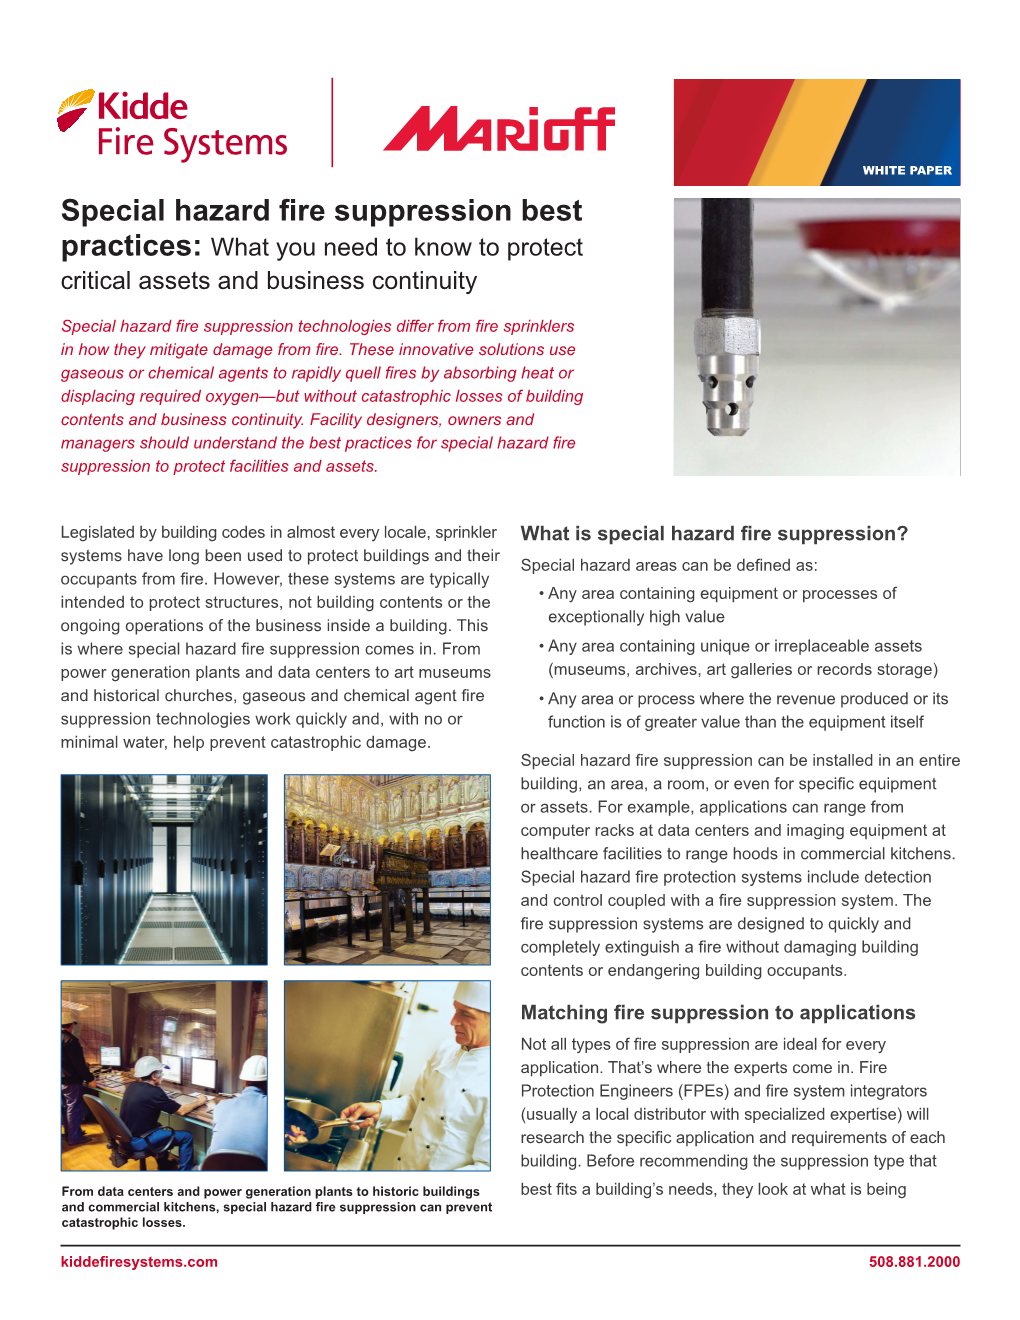 Special Hazard Fire Suppression Best Practices: What You Need to Know to Protect Critical Assets and Business Continuity